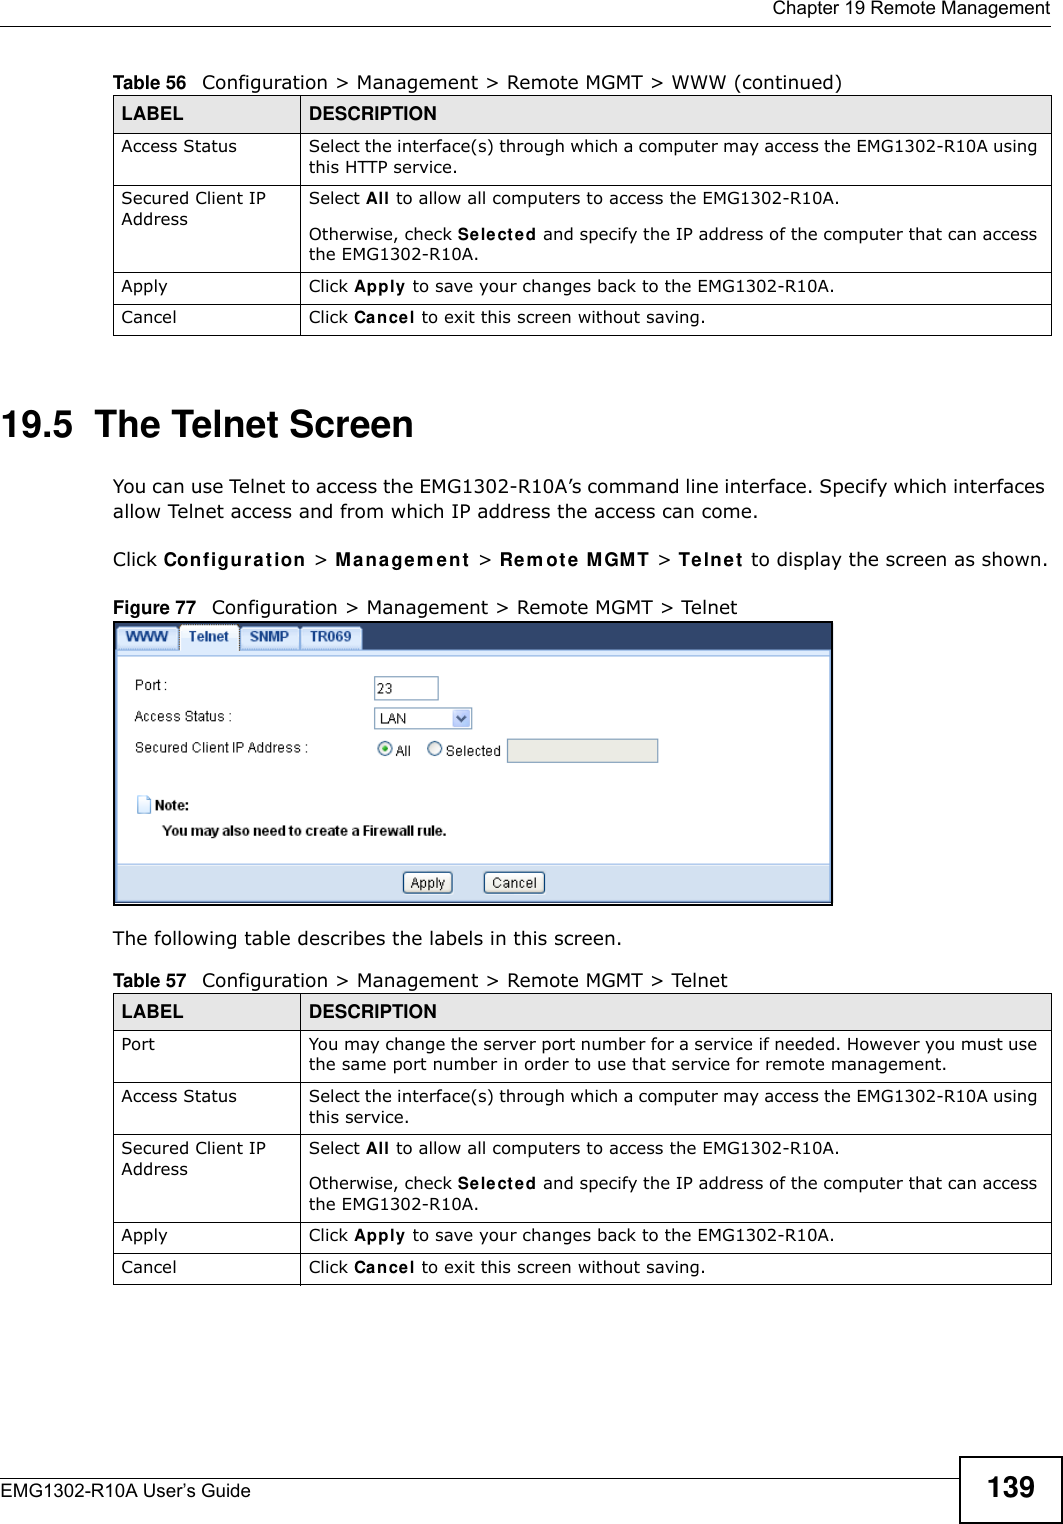  Chapter 19 Remote ManagementEMG1302-R10A User’s Guide 13919.5  The Telnet ScreenYou can use Telnet to access the EMG1302-R10A’s command line interface. Specify which interfaces allow Telnet access and from which IP address the access can come.Click Configurat ion &gt; M a n agem e n t  &gt; Rem ote M GMT &gt; Telnet  to display the screen as shown.Figure 77   Configuration &gt; Management &gt; Remote MGMT &gt; Telnet The following table describes the labels in this screen. Access Status Select the interface(s) through which a computer may access the EMG1302-R10A using this HTTP service.Secured Client IP AddressSelect All to allow all computers to access the EMG1302-R10A.Otherwise, check Sele ct ed and specify the IP address of the computer that can access the EMG1302-R10A.Apply Click Apply  to save your changes back to the EMG1302-R10A.Cancel Click Cancel to exit this screen without saving.Table 56   Configuration &gt; Management &gt; Remote MGMT &gt; WWW (continued)LABEL DESCRIPTIONTable 57   Configuration &gt; Management &gt; Remote MGMT &gt; TelnetLABEL DESCRIPTIONPort You may change the server port number for a service if needed. However you must use the same port number in order to use that service for remote management.Access Status Select the interface(s) through which a computer may access the EMG1302-R10A using this service.Secured Client IP AddressSelect All to allow all computers to access the EMG1302-R10A.Otherwise, check Sele ct ed and specify the IP address of the computer that can access the EMG1302-R10A.Apply Click Apply  to save your changes back to the EMG1302-R10A.Cancel Click Cancel to exit this screen without saving.